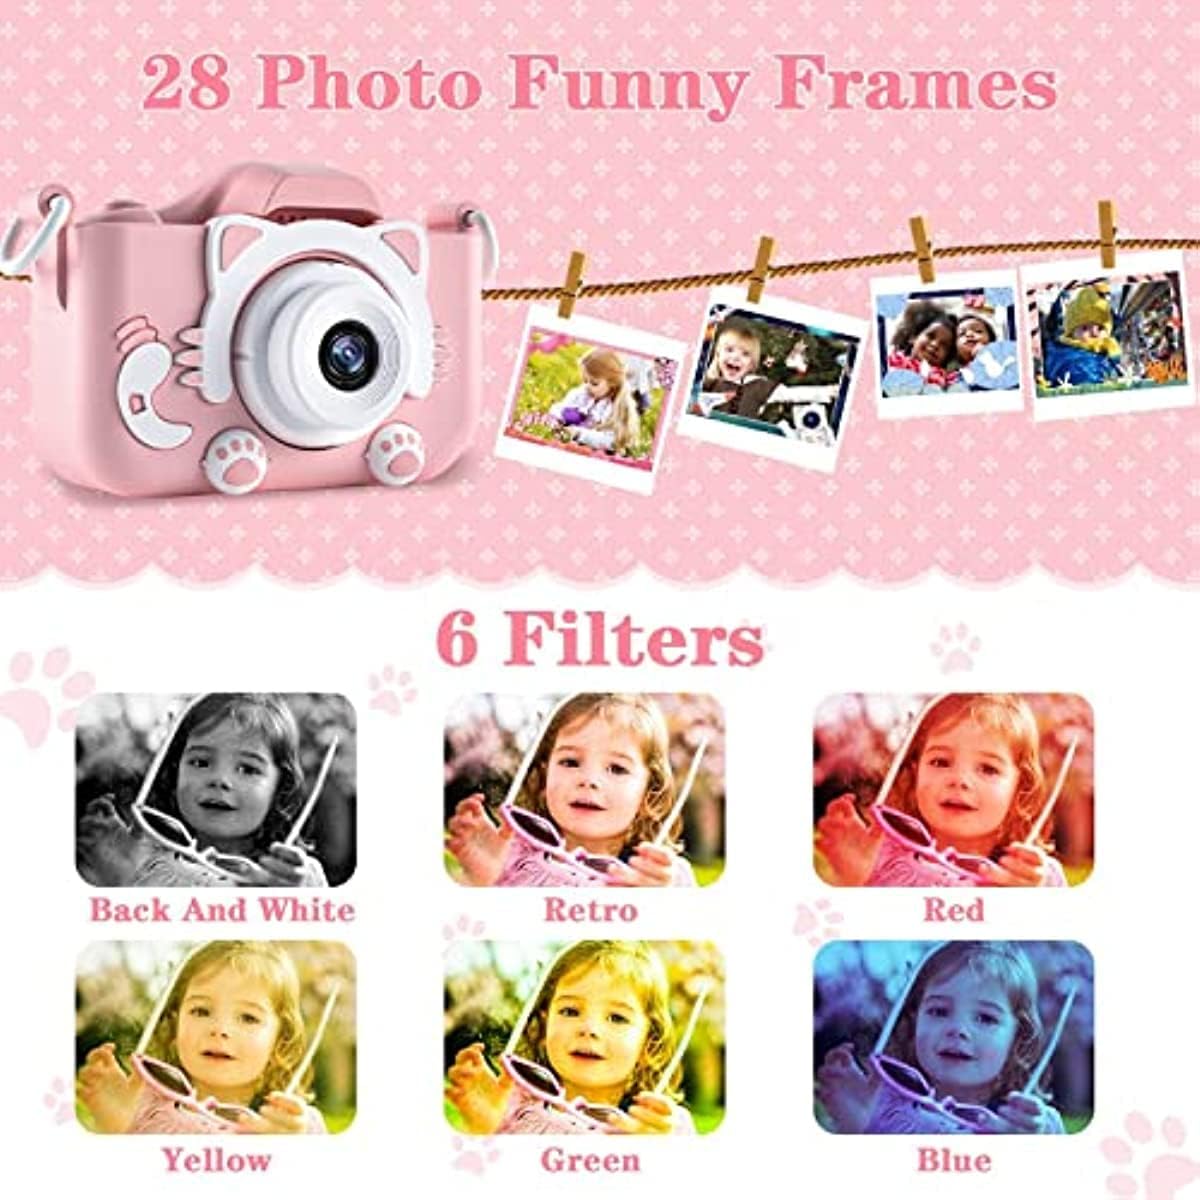 Malay Kids Camera,1080P HD Digital Video Camera Toy for 3-12 Year Old Boys/Girls, Birthday Festival Gifts for Kids,USB Rechargeable Kids Selfie Camera with 32GB SD Card and card reader(Pink)